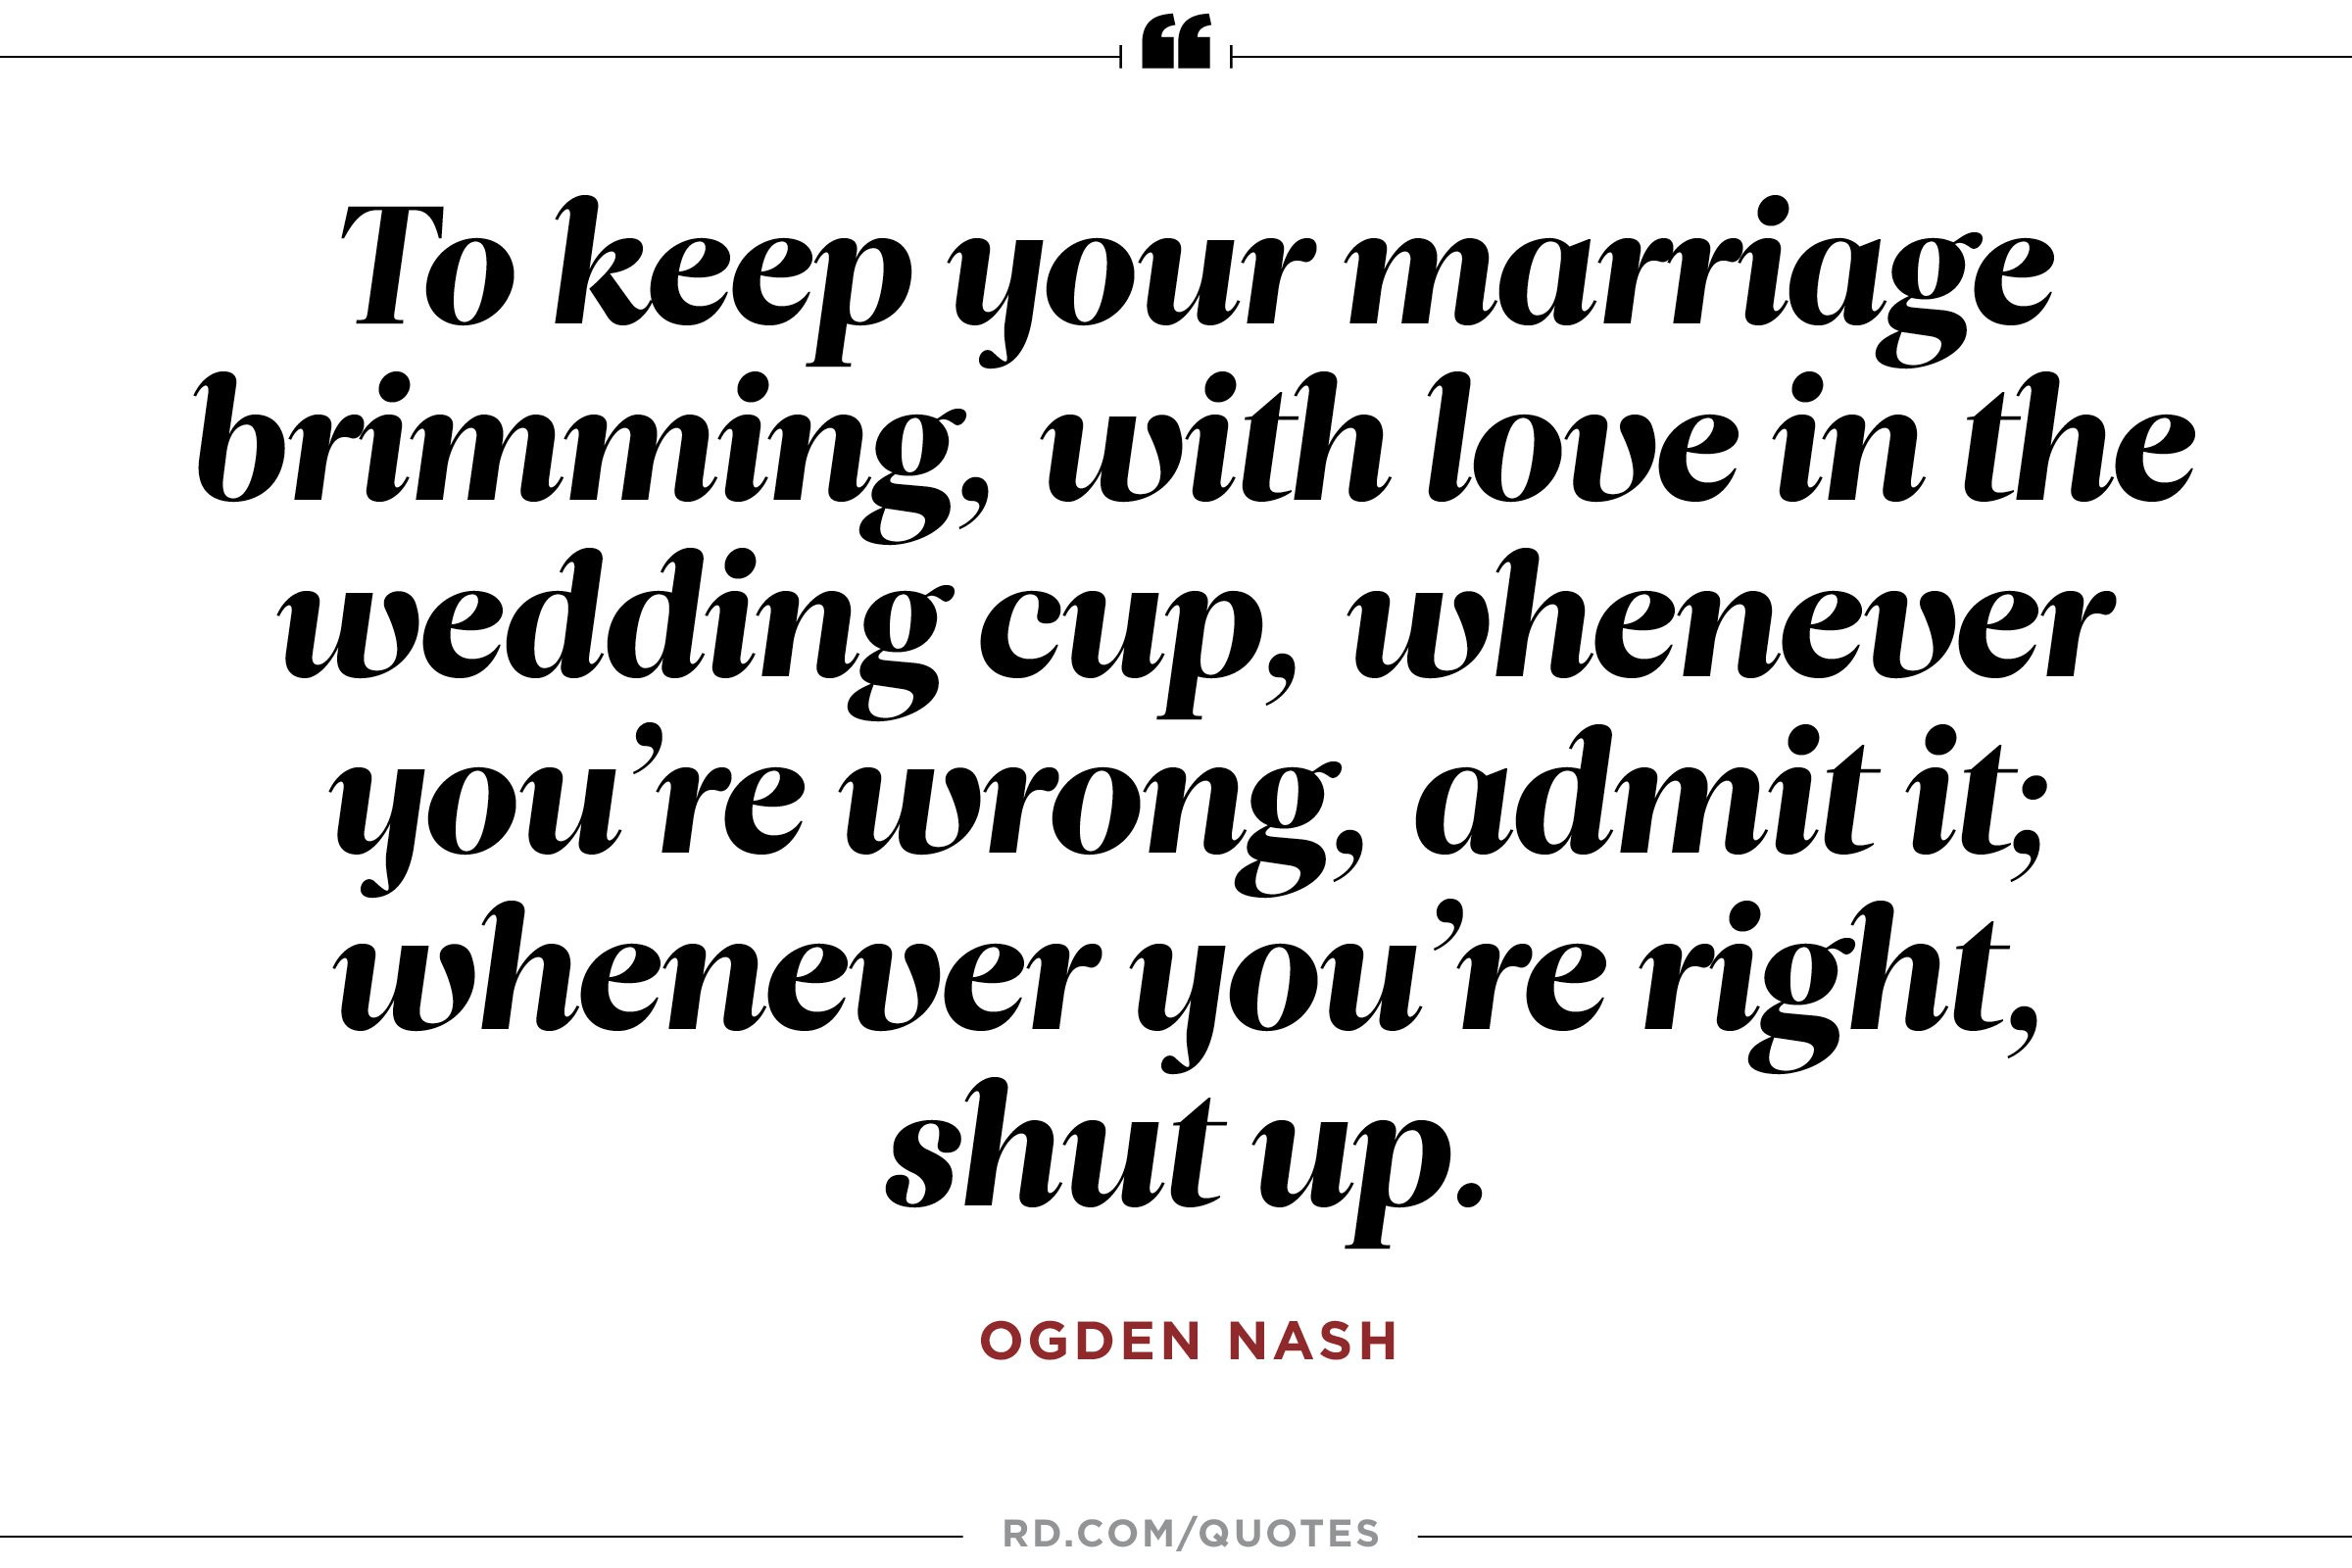 Quotes About Marriage
 8 Funny Marriage Quotes From the Greatest Wits of All Time